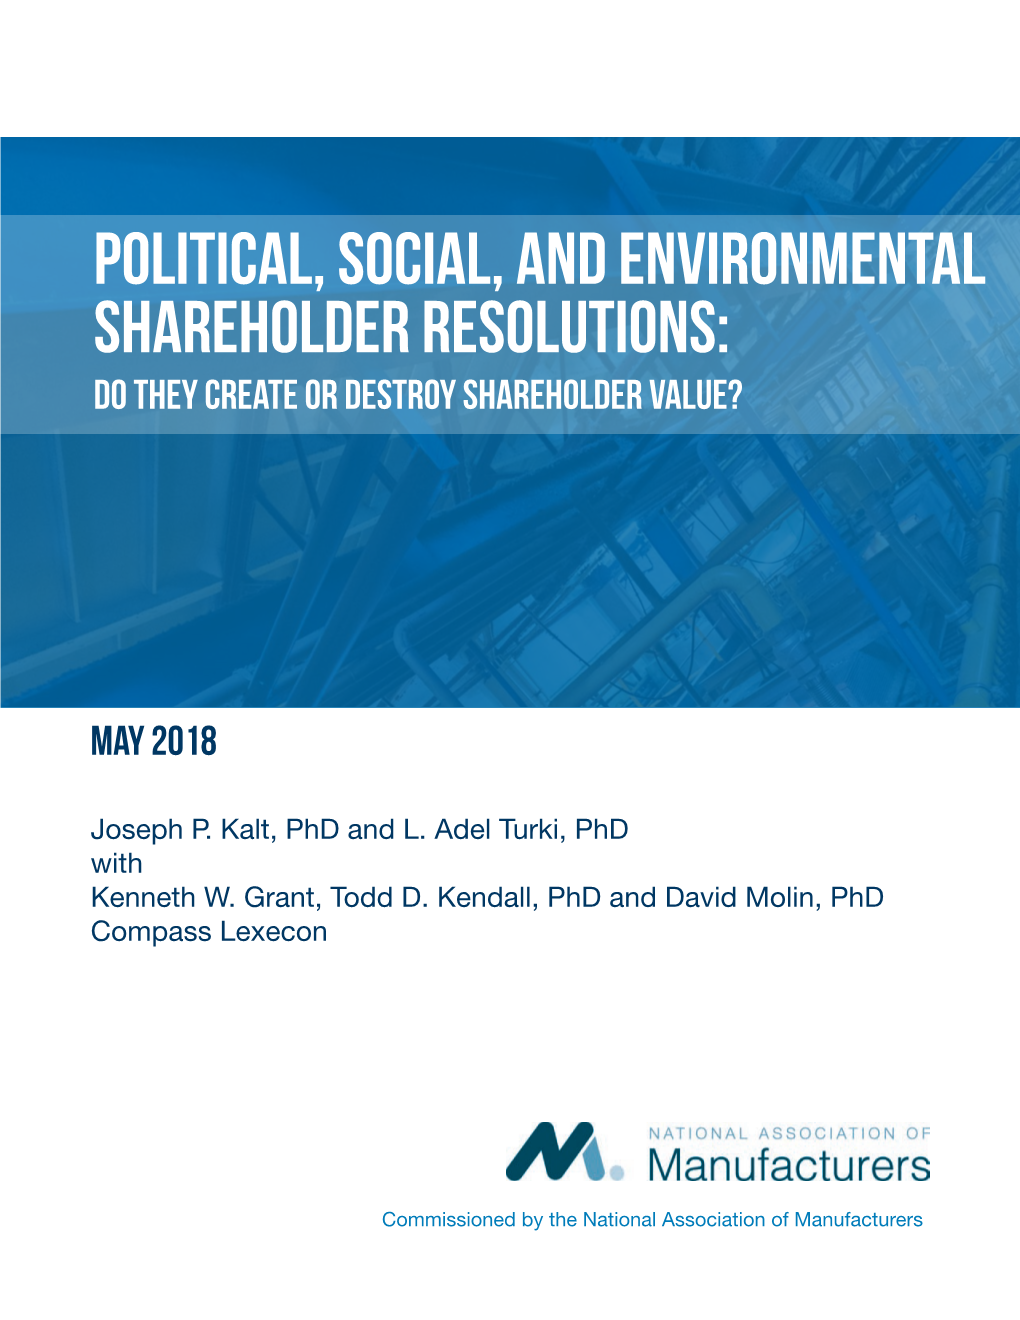 Political, Social, and Environmental Shareholder Resolutions: Do They Create Or Destroy Shareholder Value?